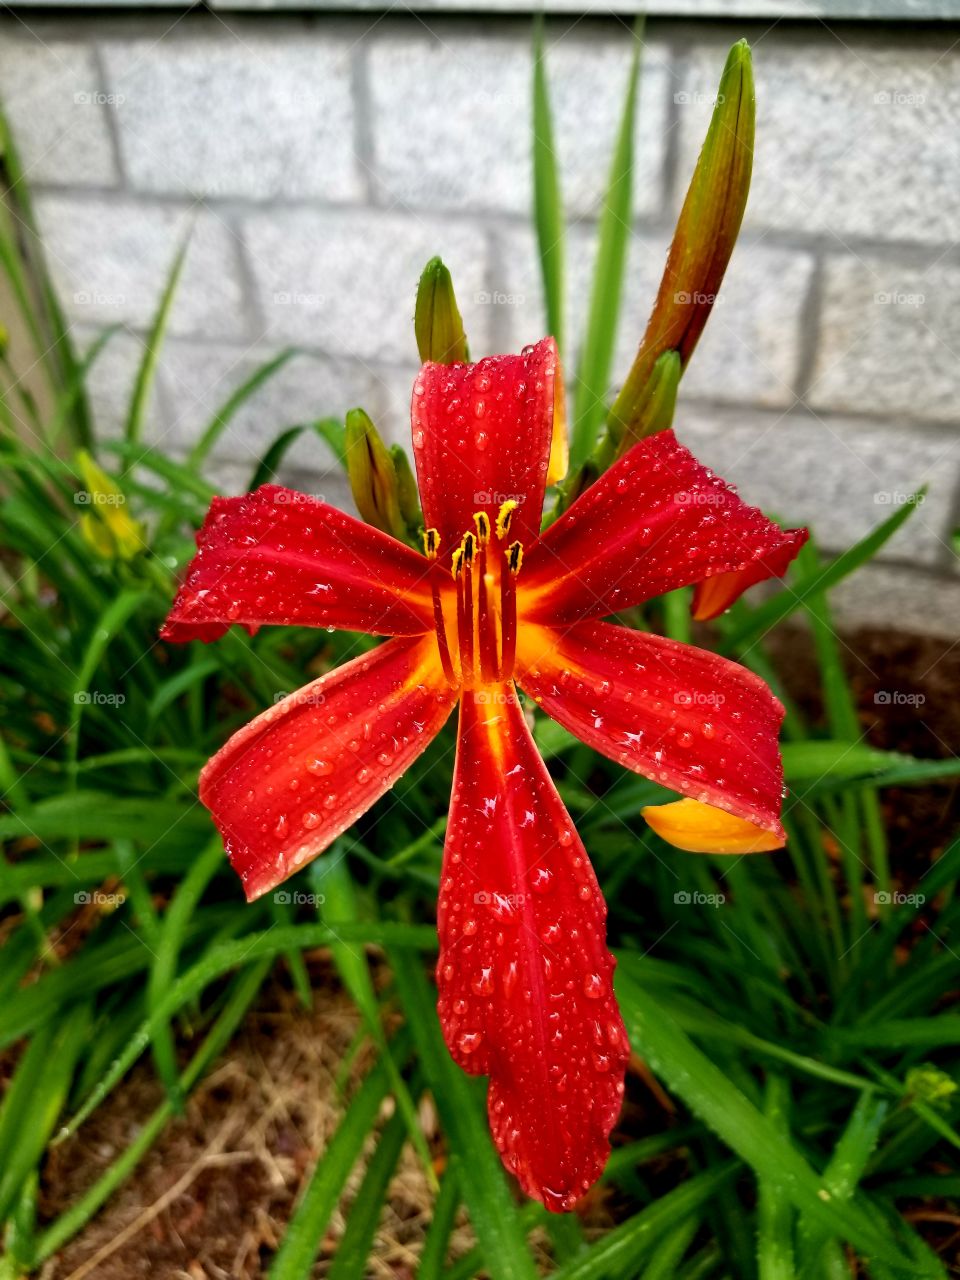 lily after the rain